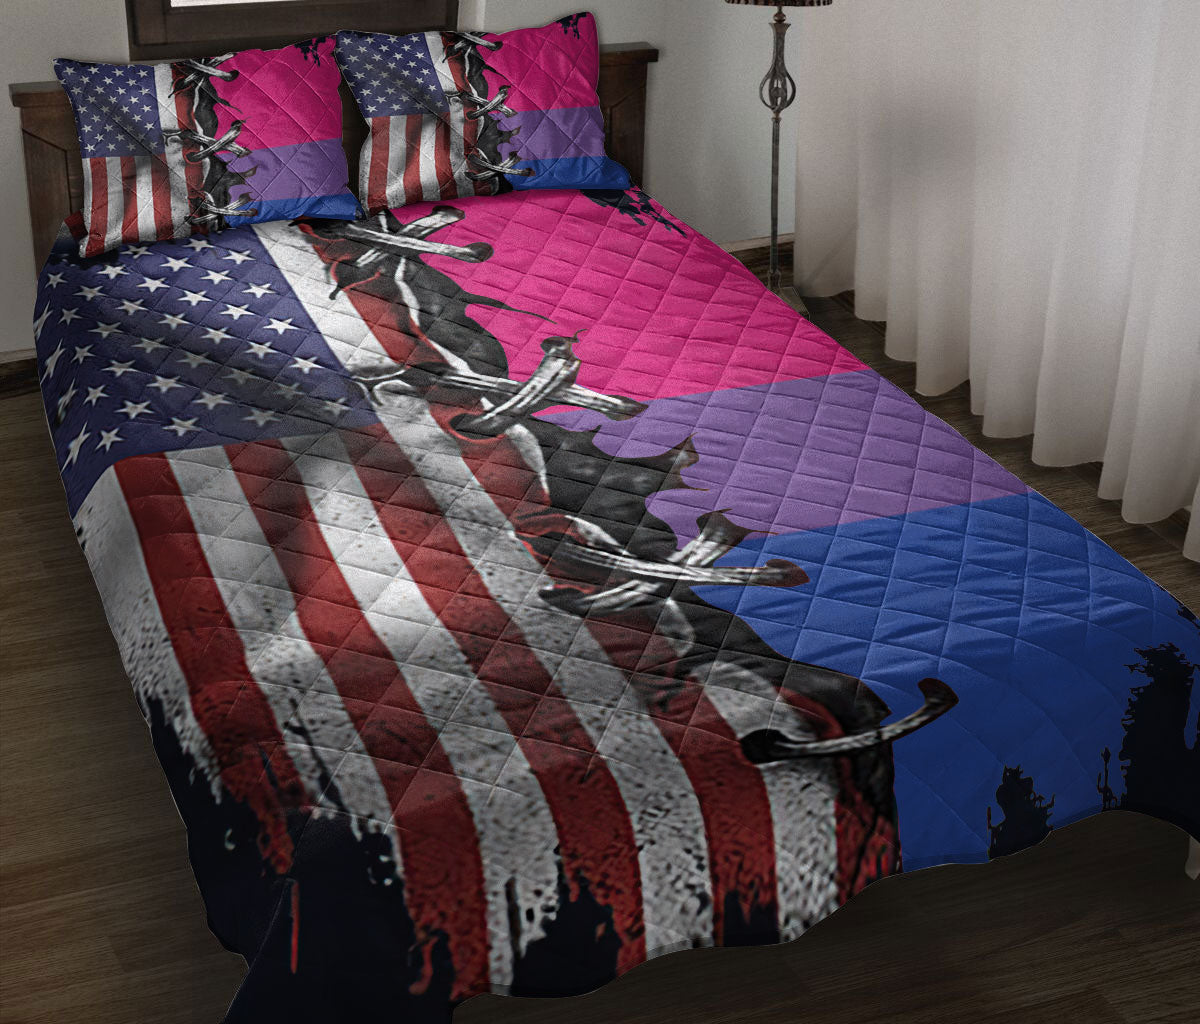 Ohaprints-Quilt-Bed-Set-Pillowcase-America-Us-Bisexual-Pride-Flag-Lgbt-Lgbtq-Support-Gift-Idea-Blanket-Bedspread-Bedding-323-Throw (55'' x 60'')